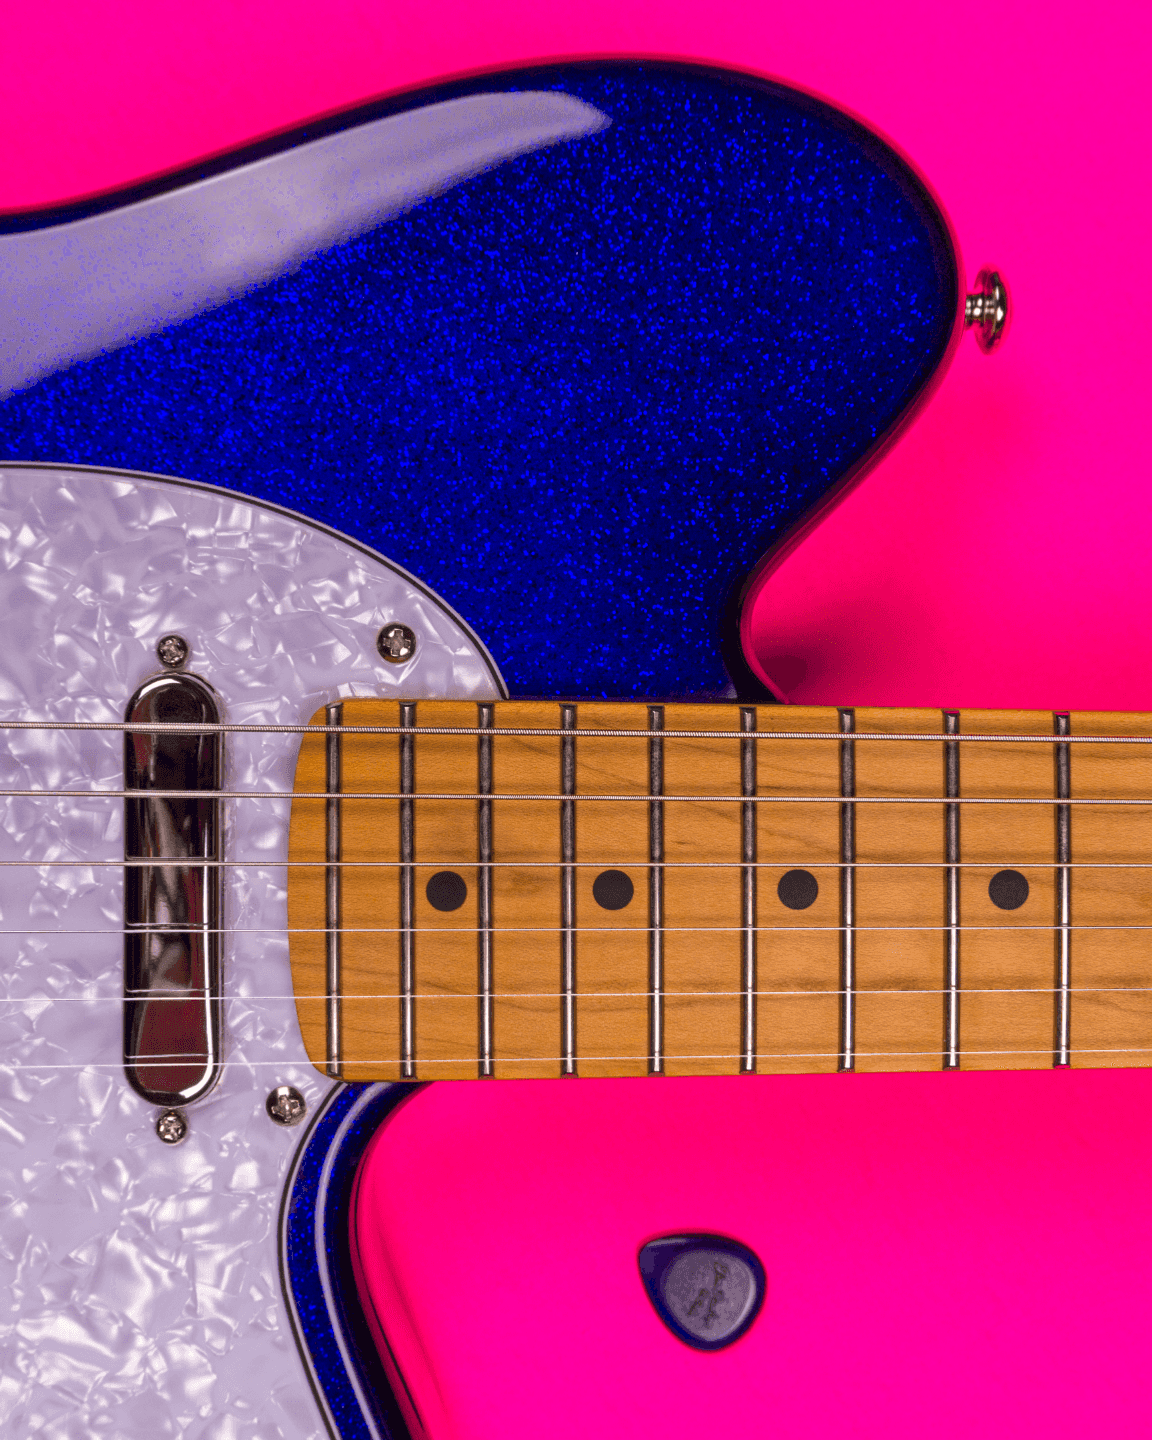 Ultra close view of a Talman TM302PM-BSP (blue sparkle) with a purple Dunlop guitar pick, both resting on a pink background